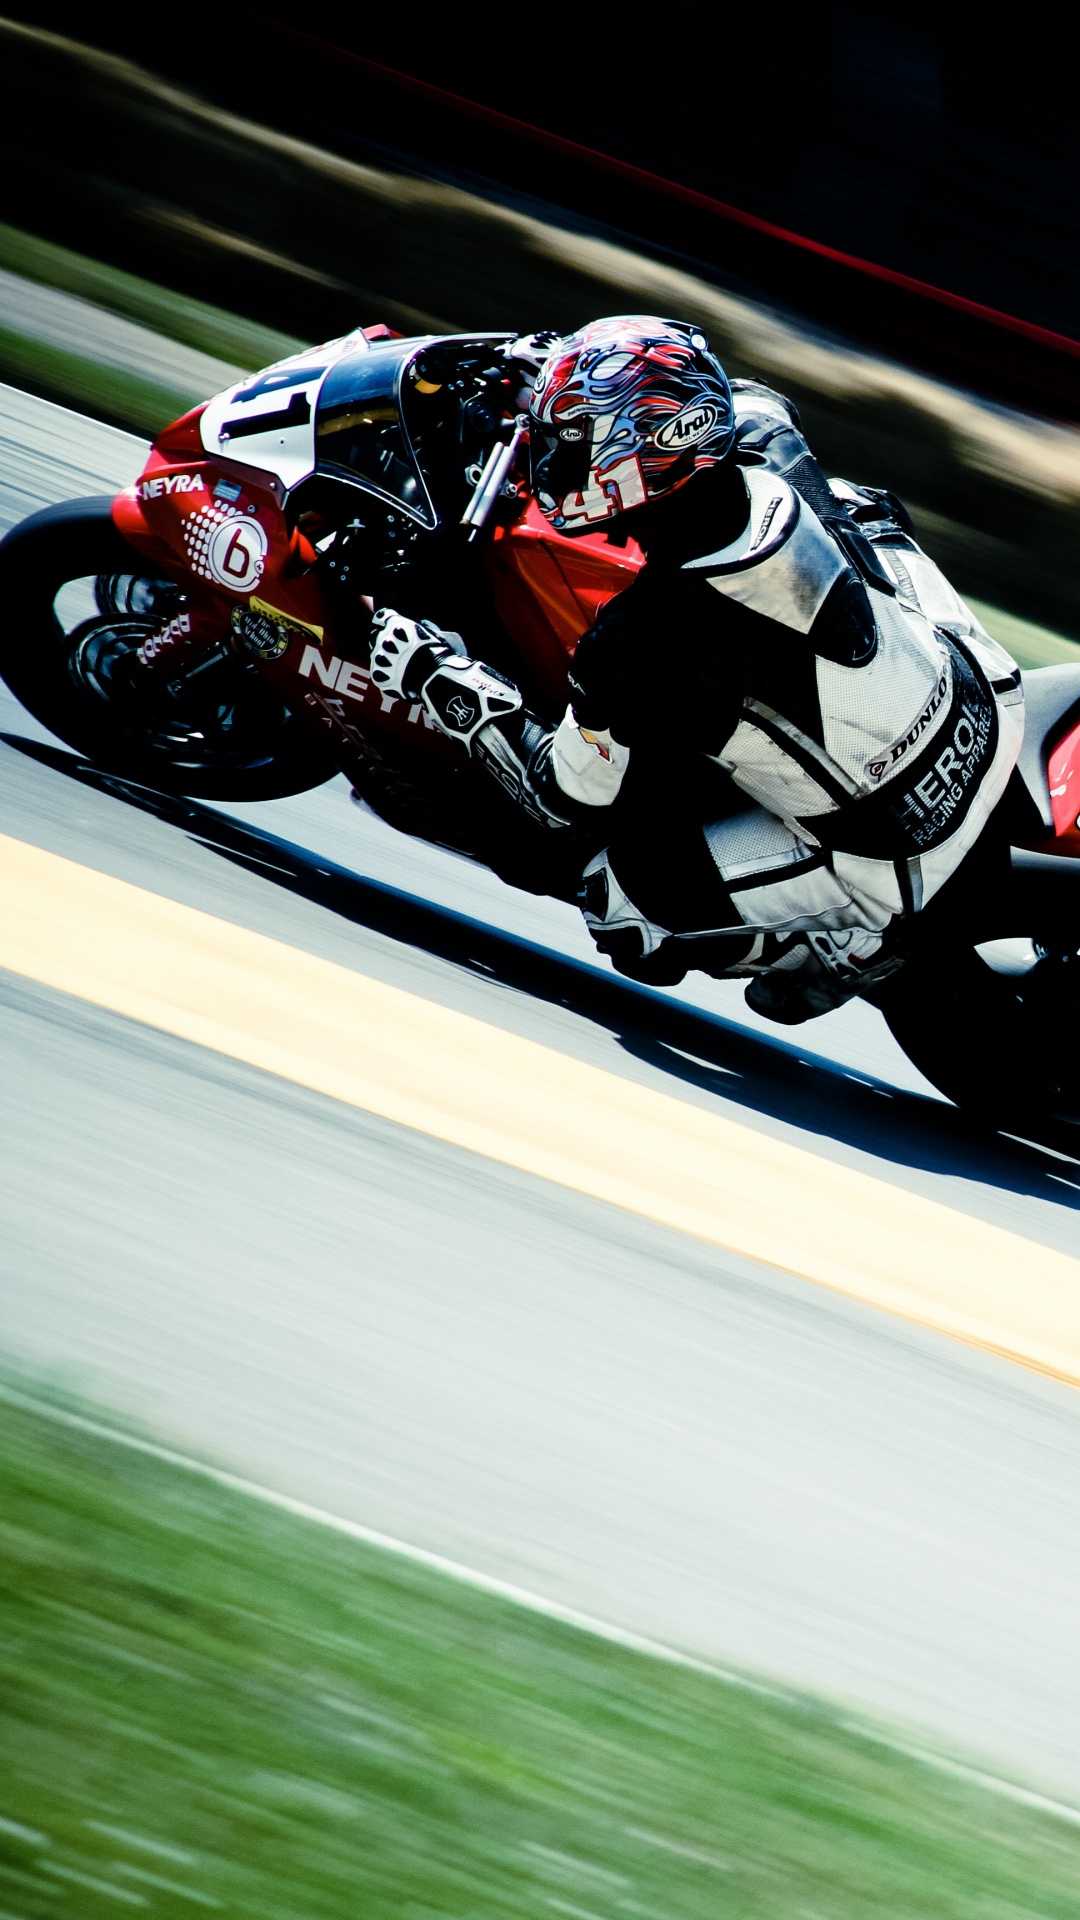 Man in Red and White Racing Suit Riding on Sports Bike. Wallpaper in 1080x1920 Resolution